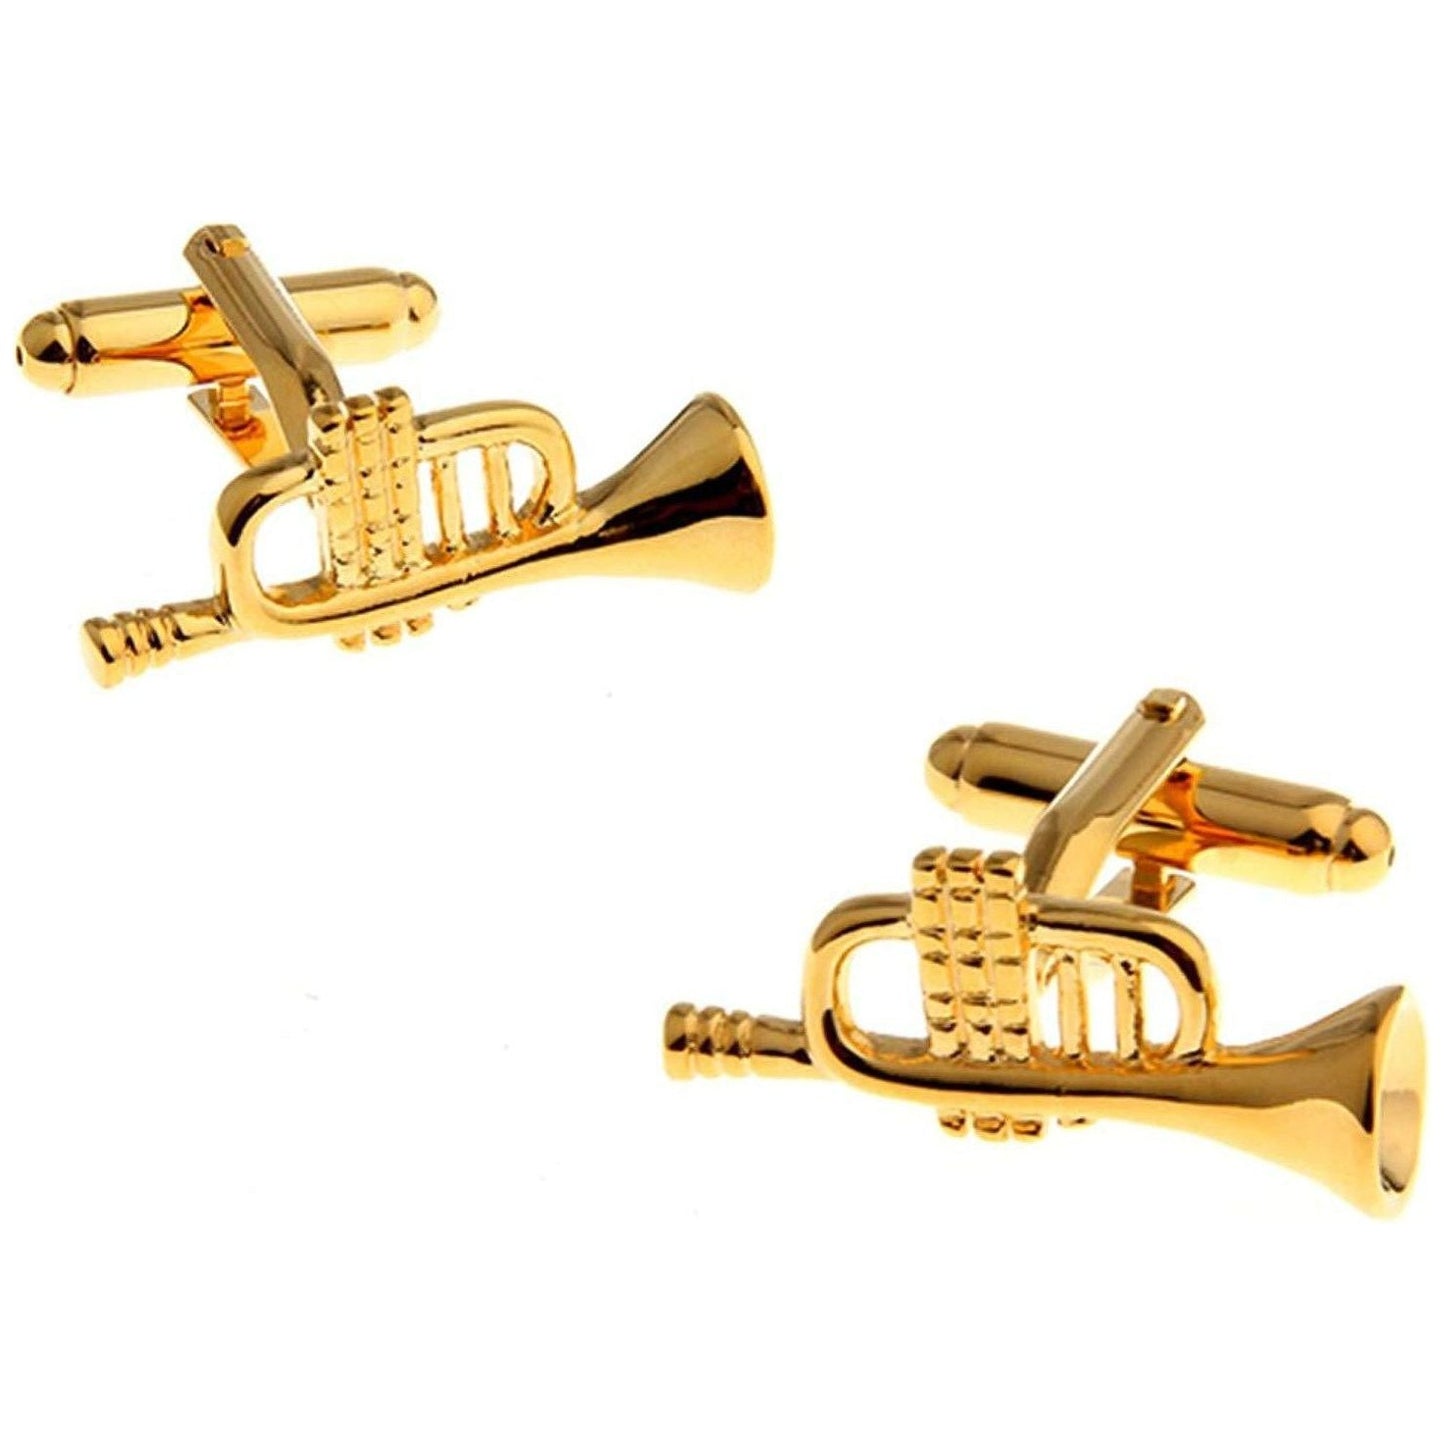 Gold Plated Trumpet Cufflinks - Ashton and Finch